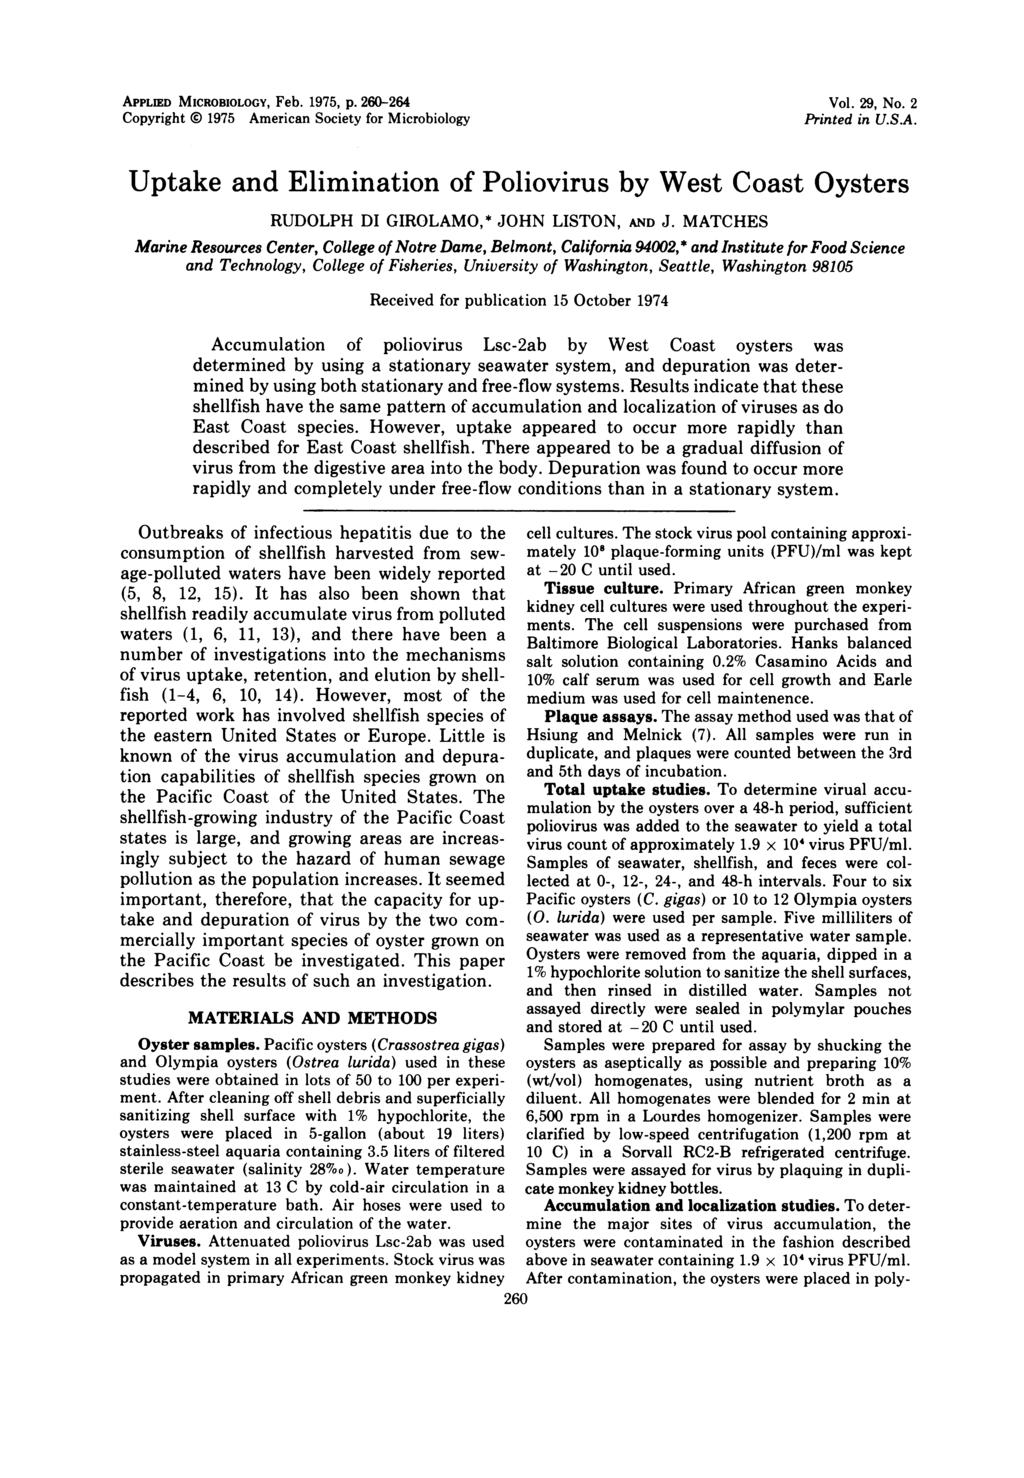 APPLIED MICROBIOLOGY, Feb. 1975, p. 260-264 Copyright 1975 American Society for Microbiology Vol. 29, No. 2 Printed in U.S.A. Uptake and Elimination of Poliovirus by West Coast Oysters RUDOLPH DI GIROLAMO,* JOHN LISTON, AND J.